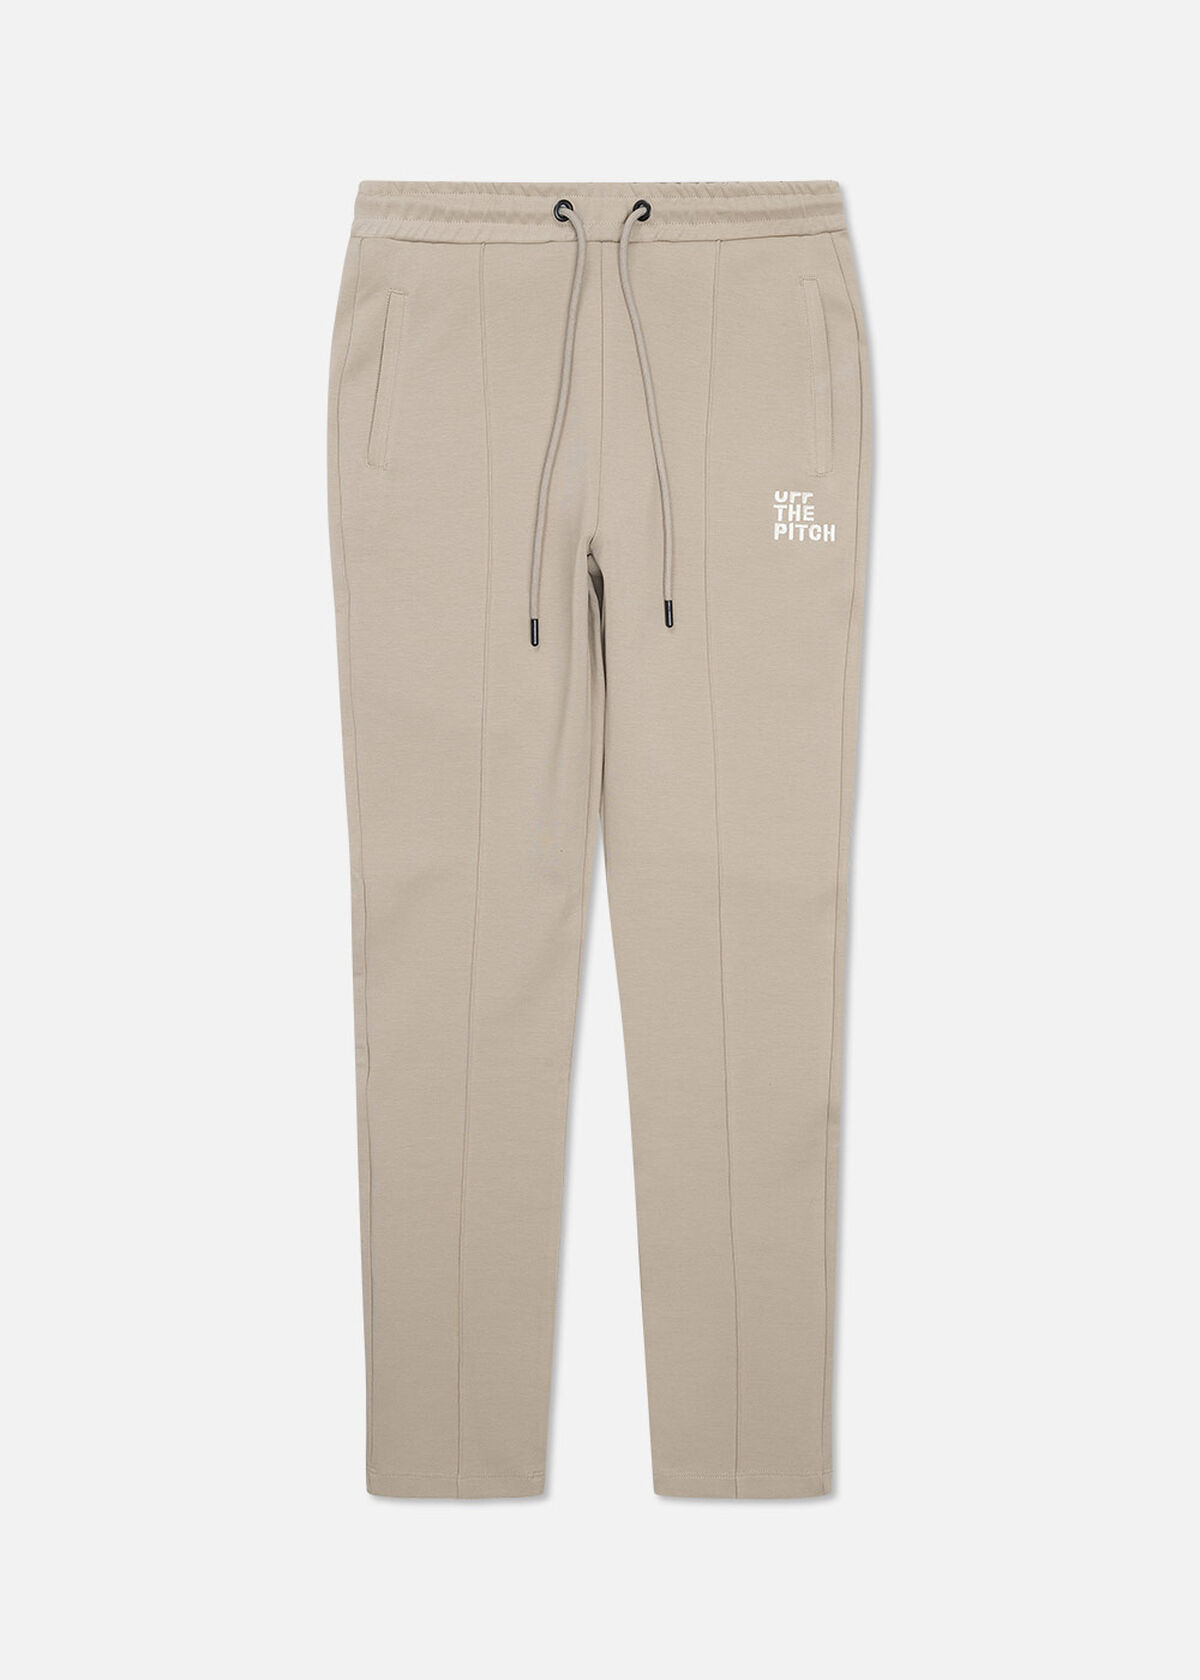 Offset Jogger Woman - 78% Cotton/17% Polyester/5% , Sand, hi-res